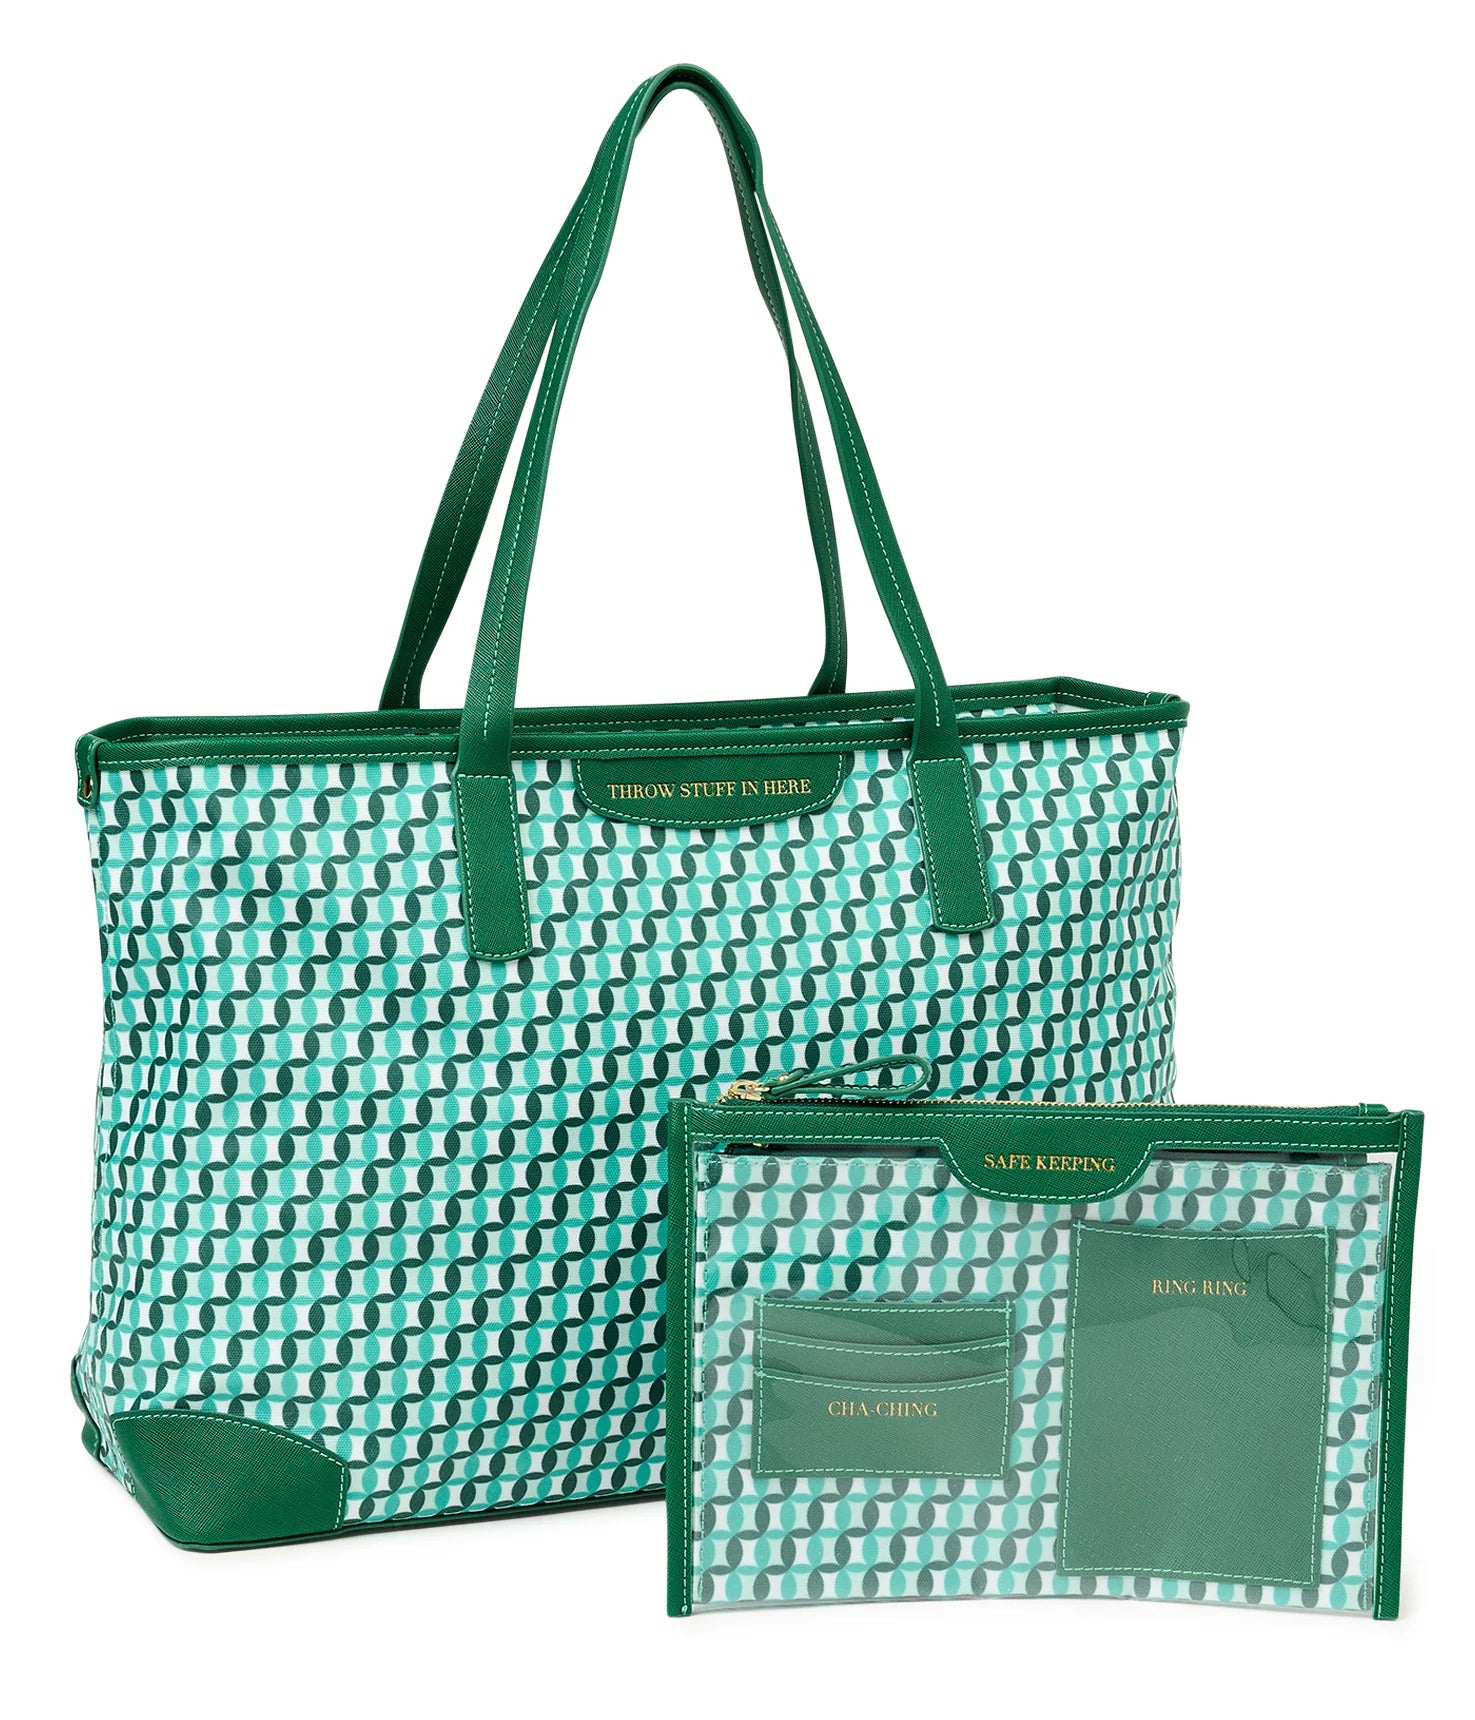 The green tote and pouch set